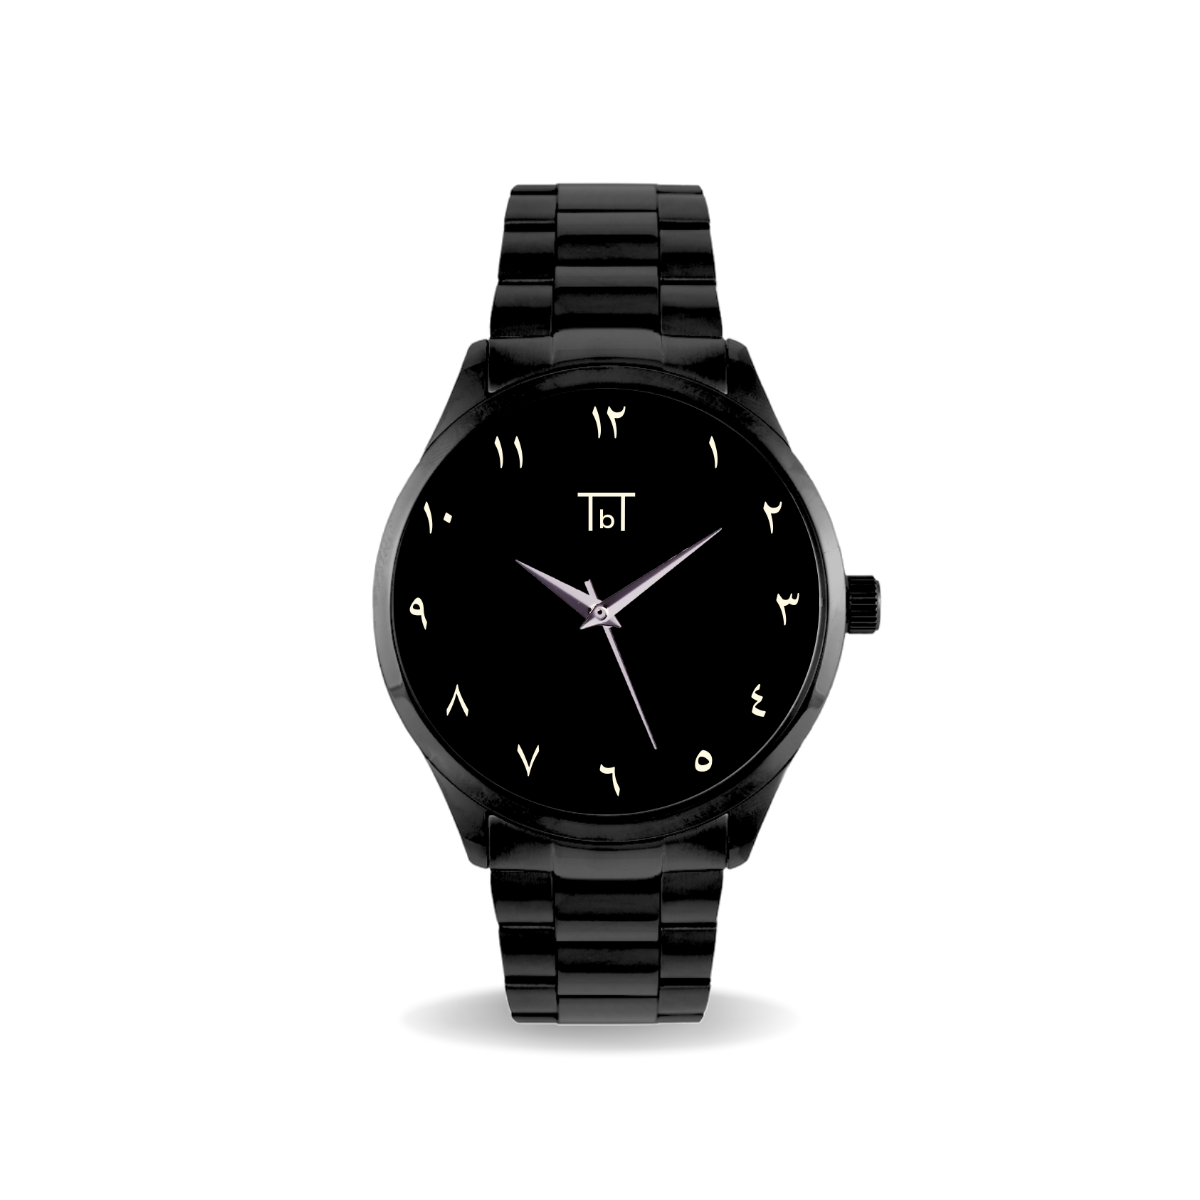 Arabic Dial Watch in Black Stainless Steel FOR HER